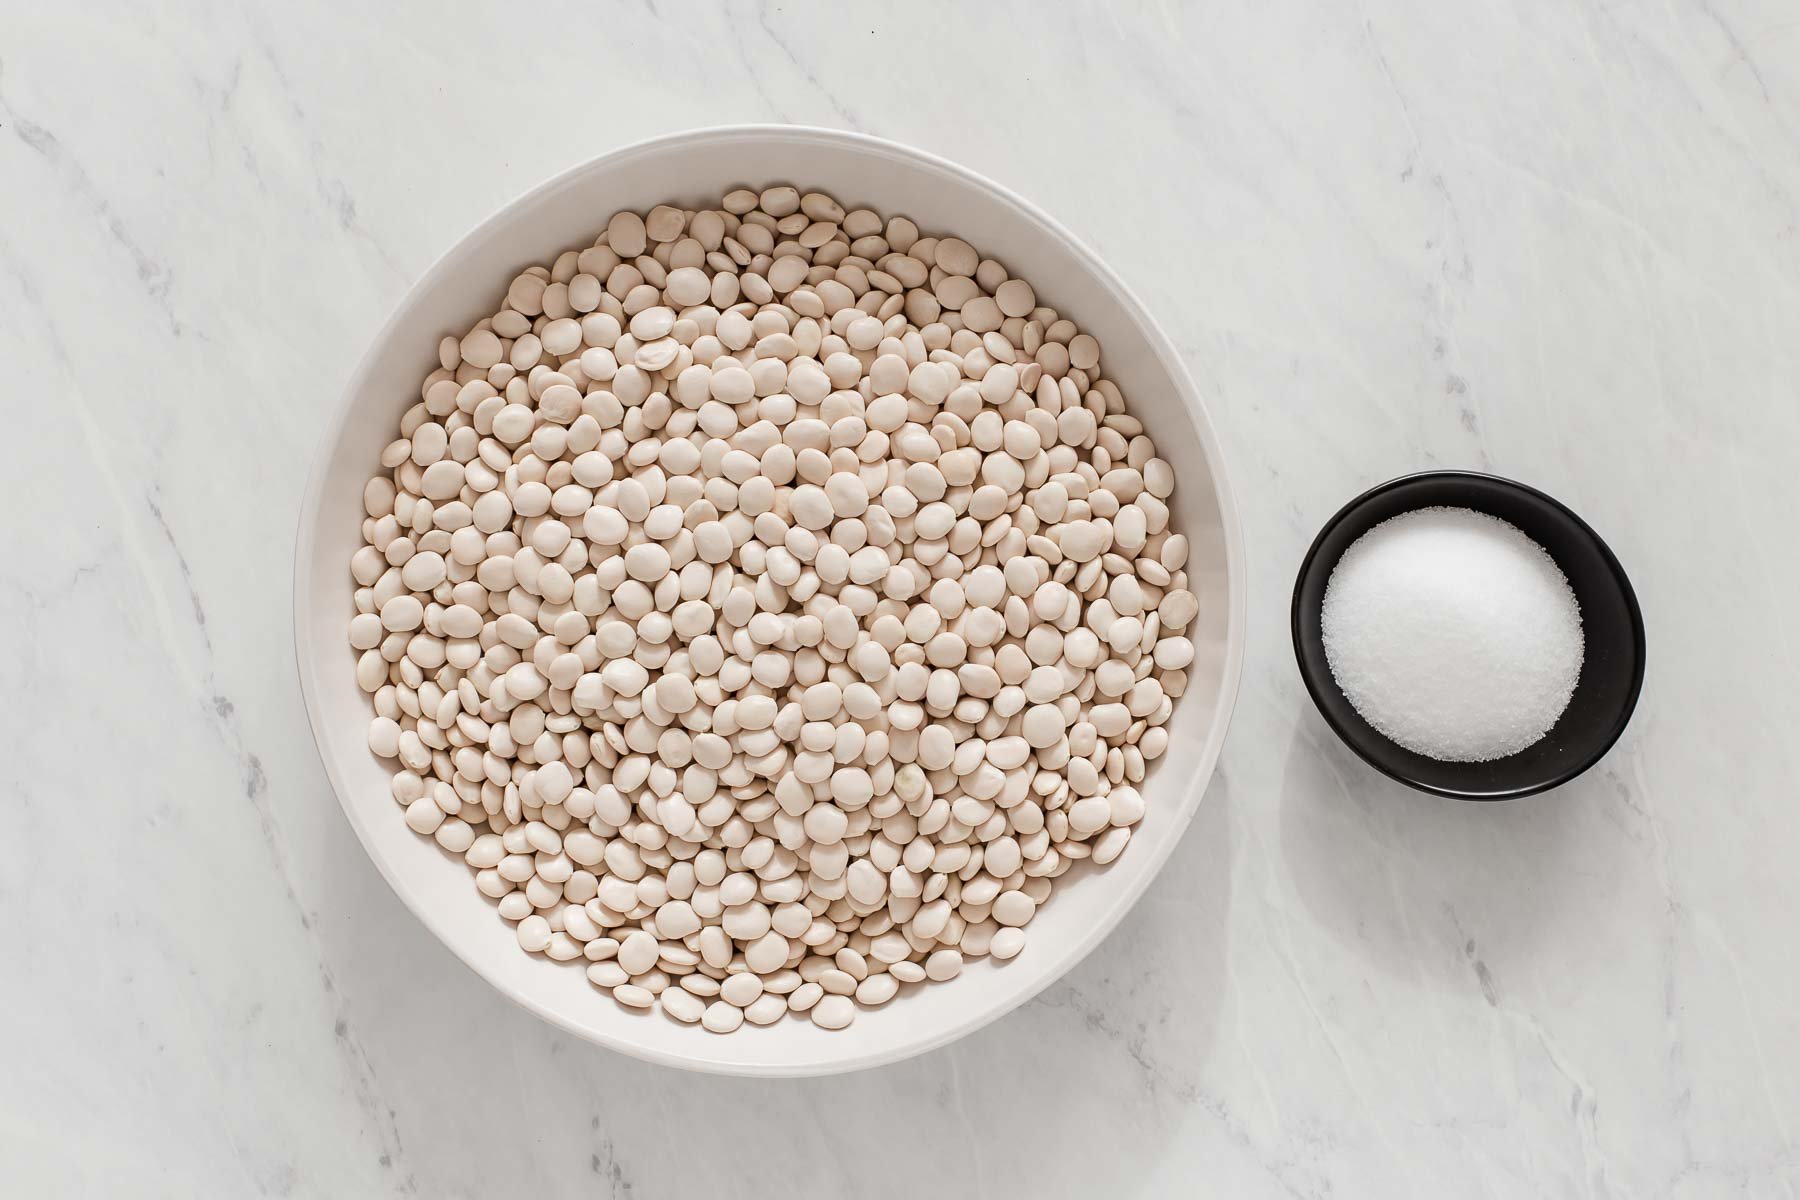 Bowl of dry white beans and small bowl of salt.